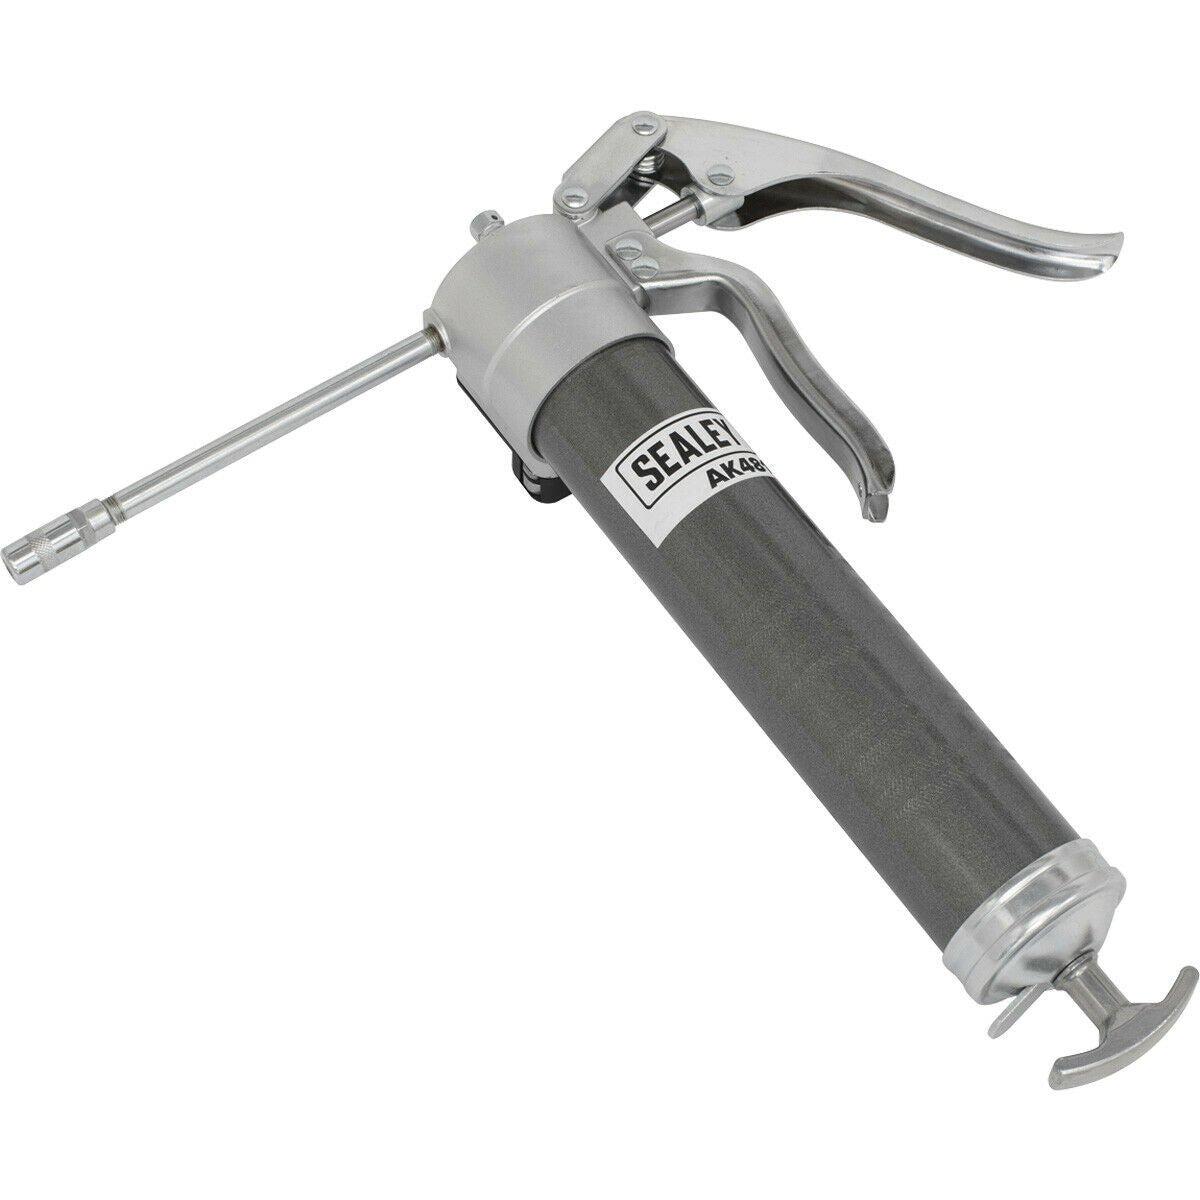 Quick Release Pistol Type Grease Gun - 3-Way Fill - Rigid Delivery Tube